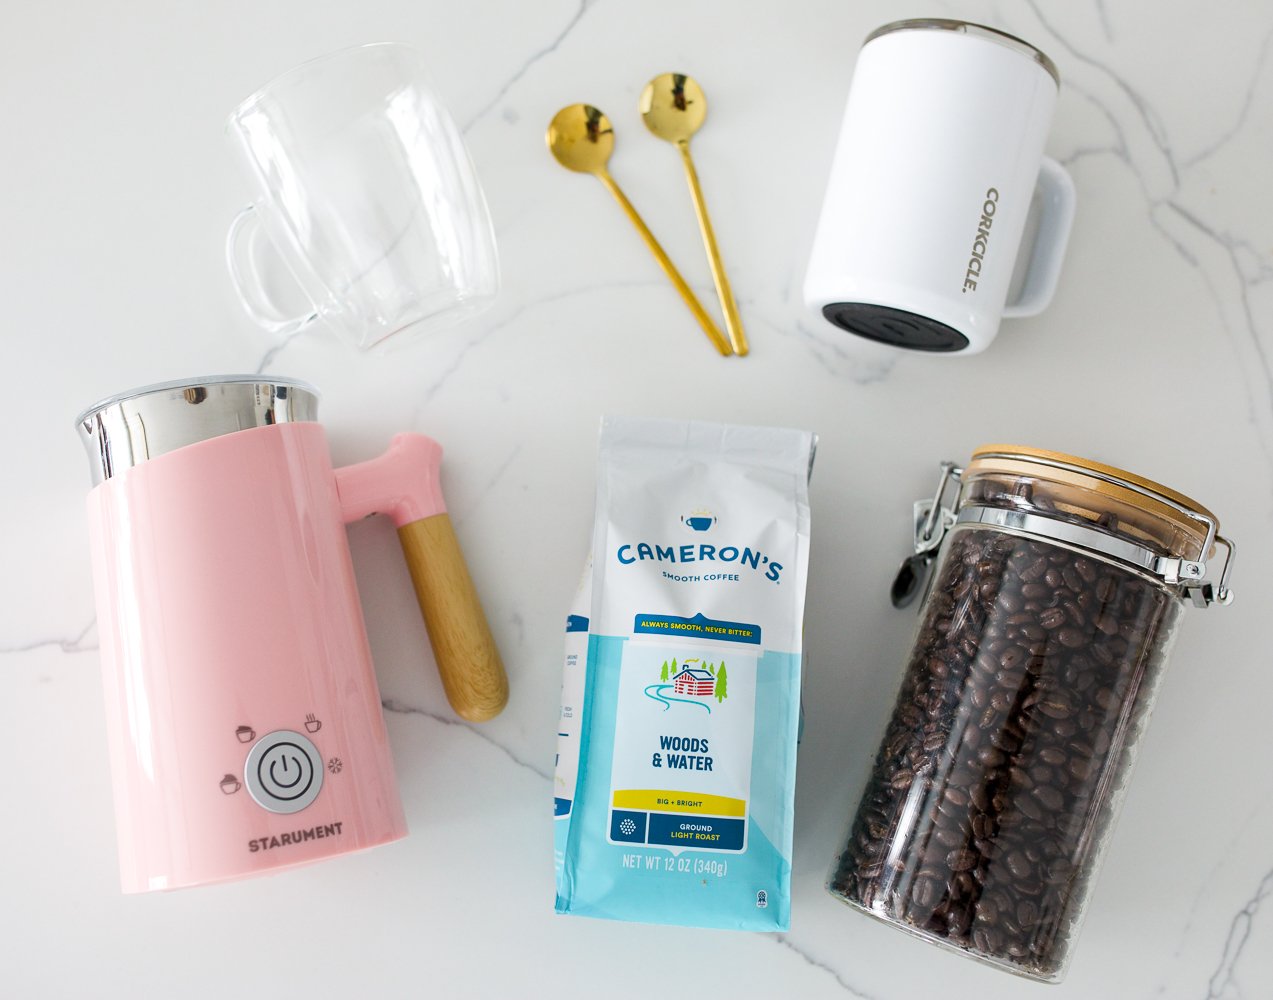 coffee lovers gift guide